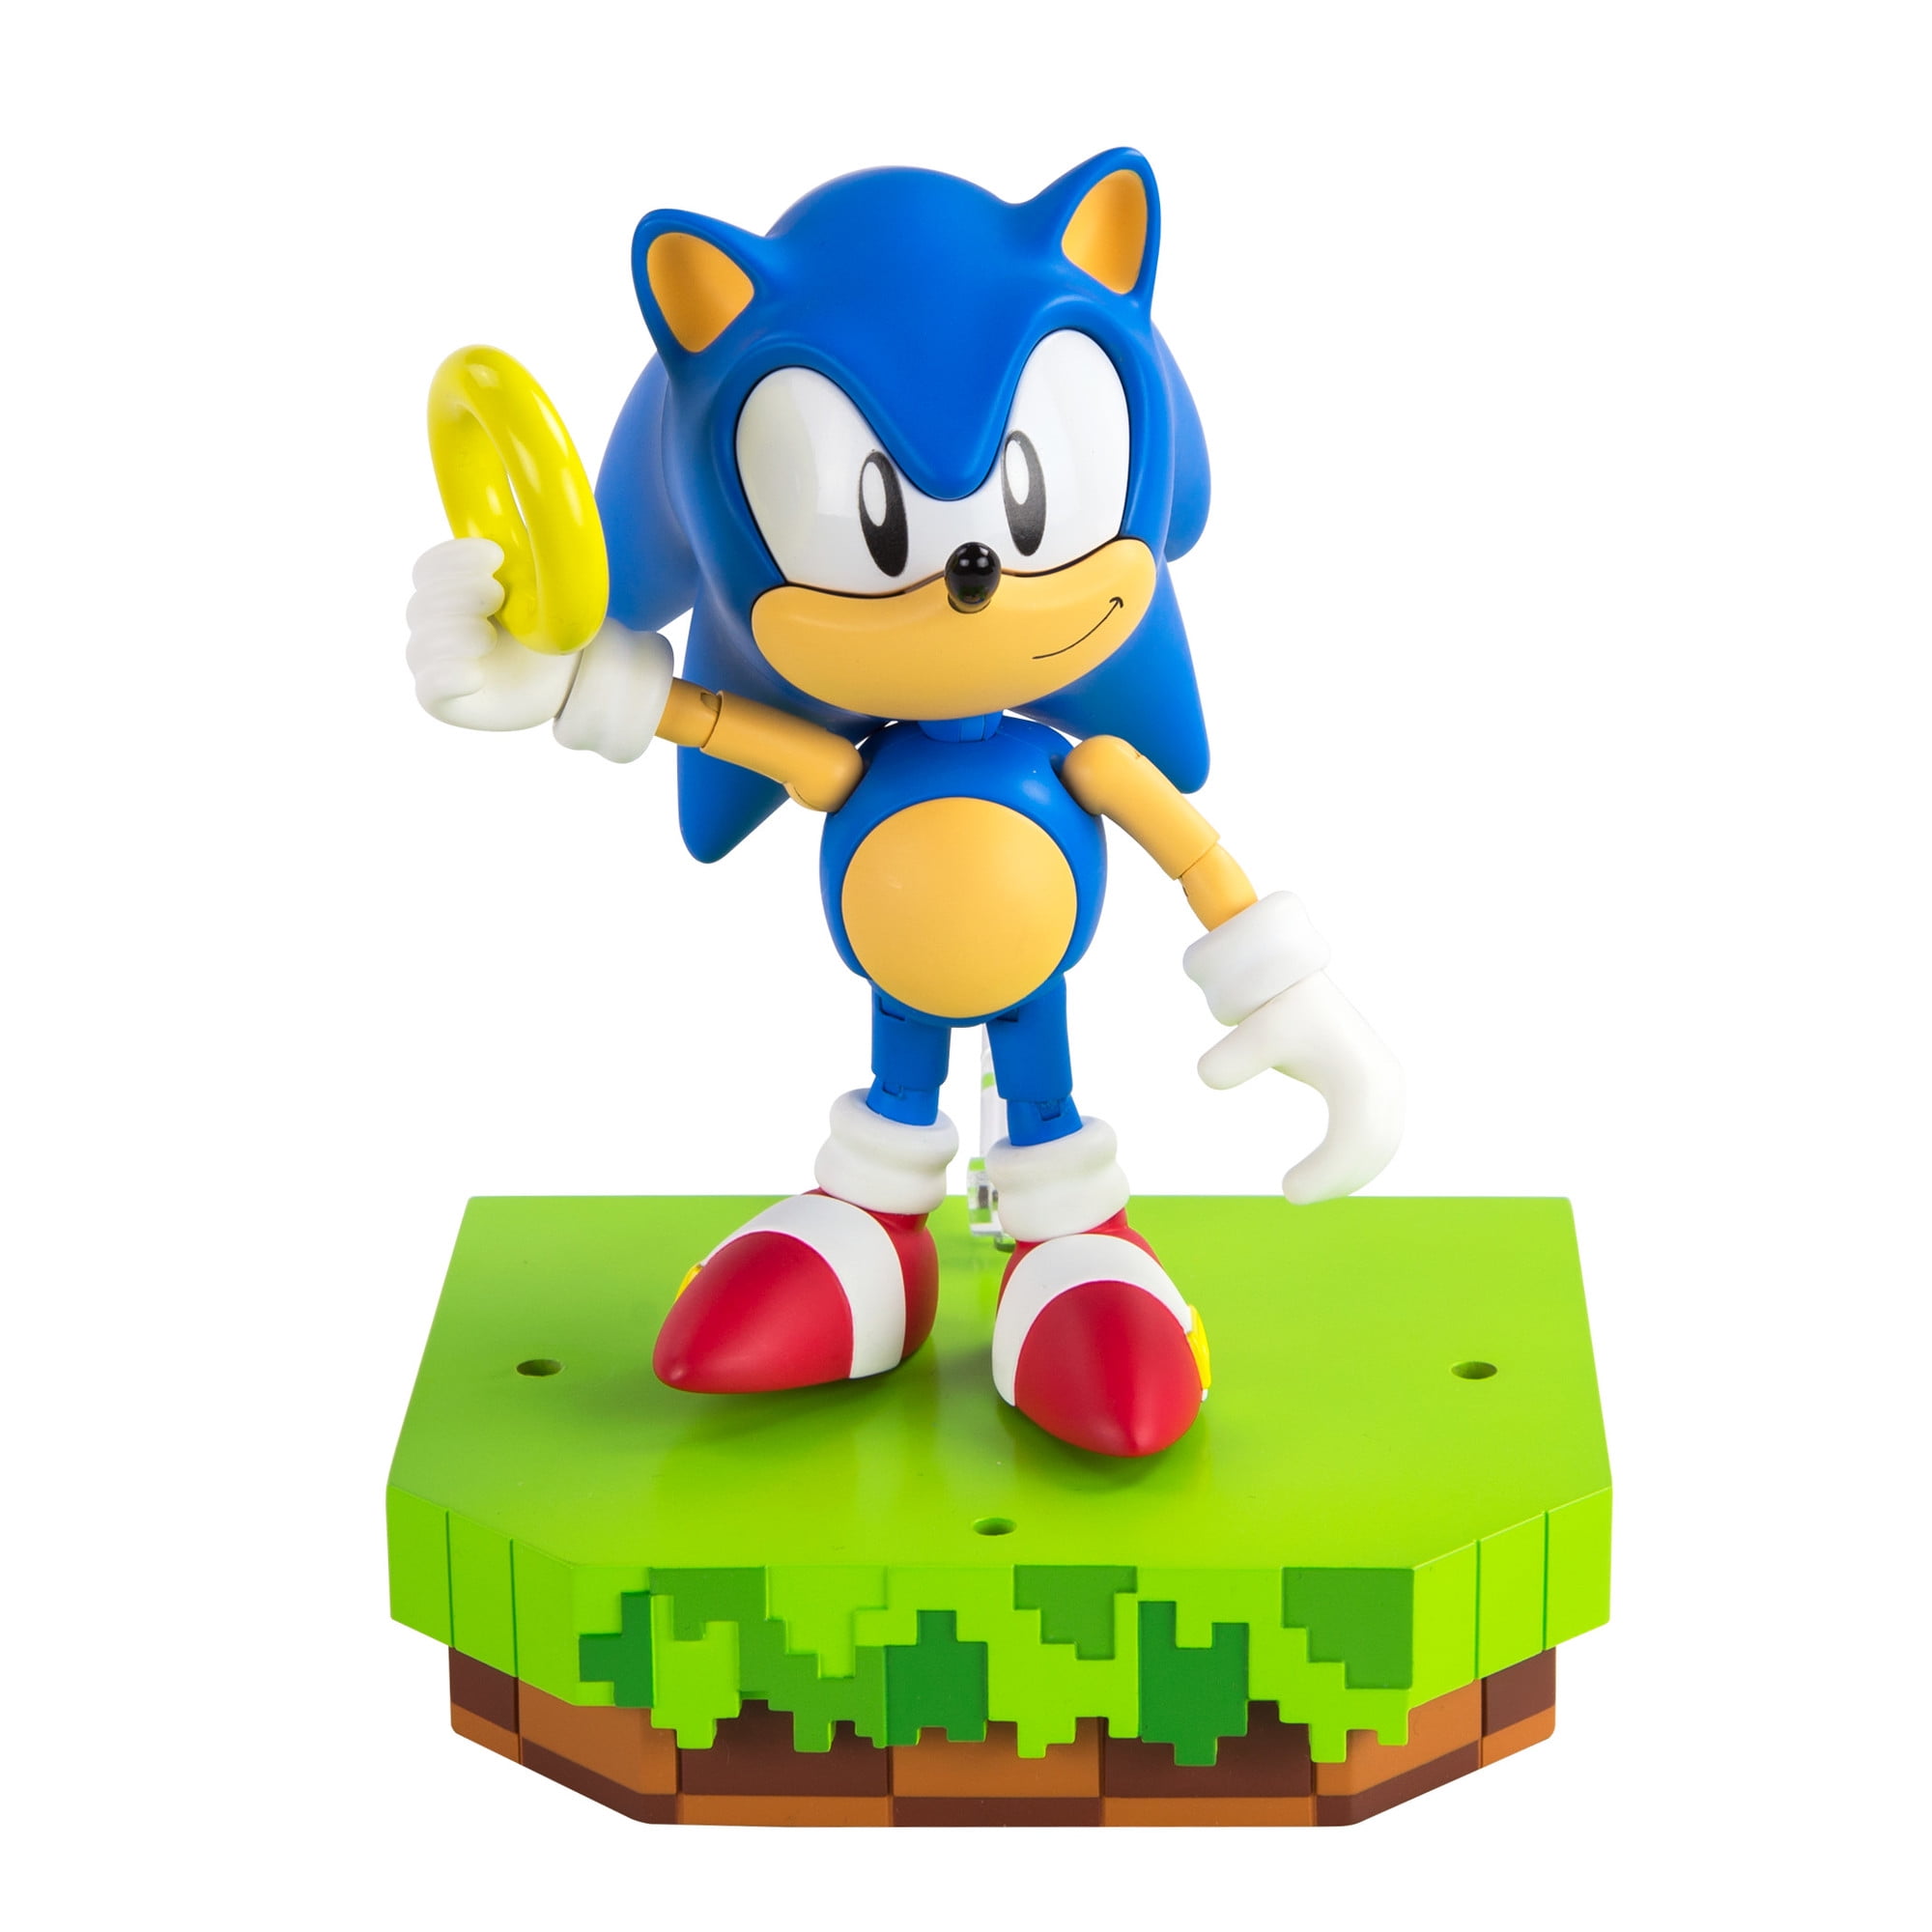 sonic the hedgehog toys at walmart